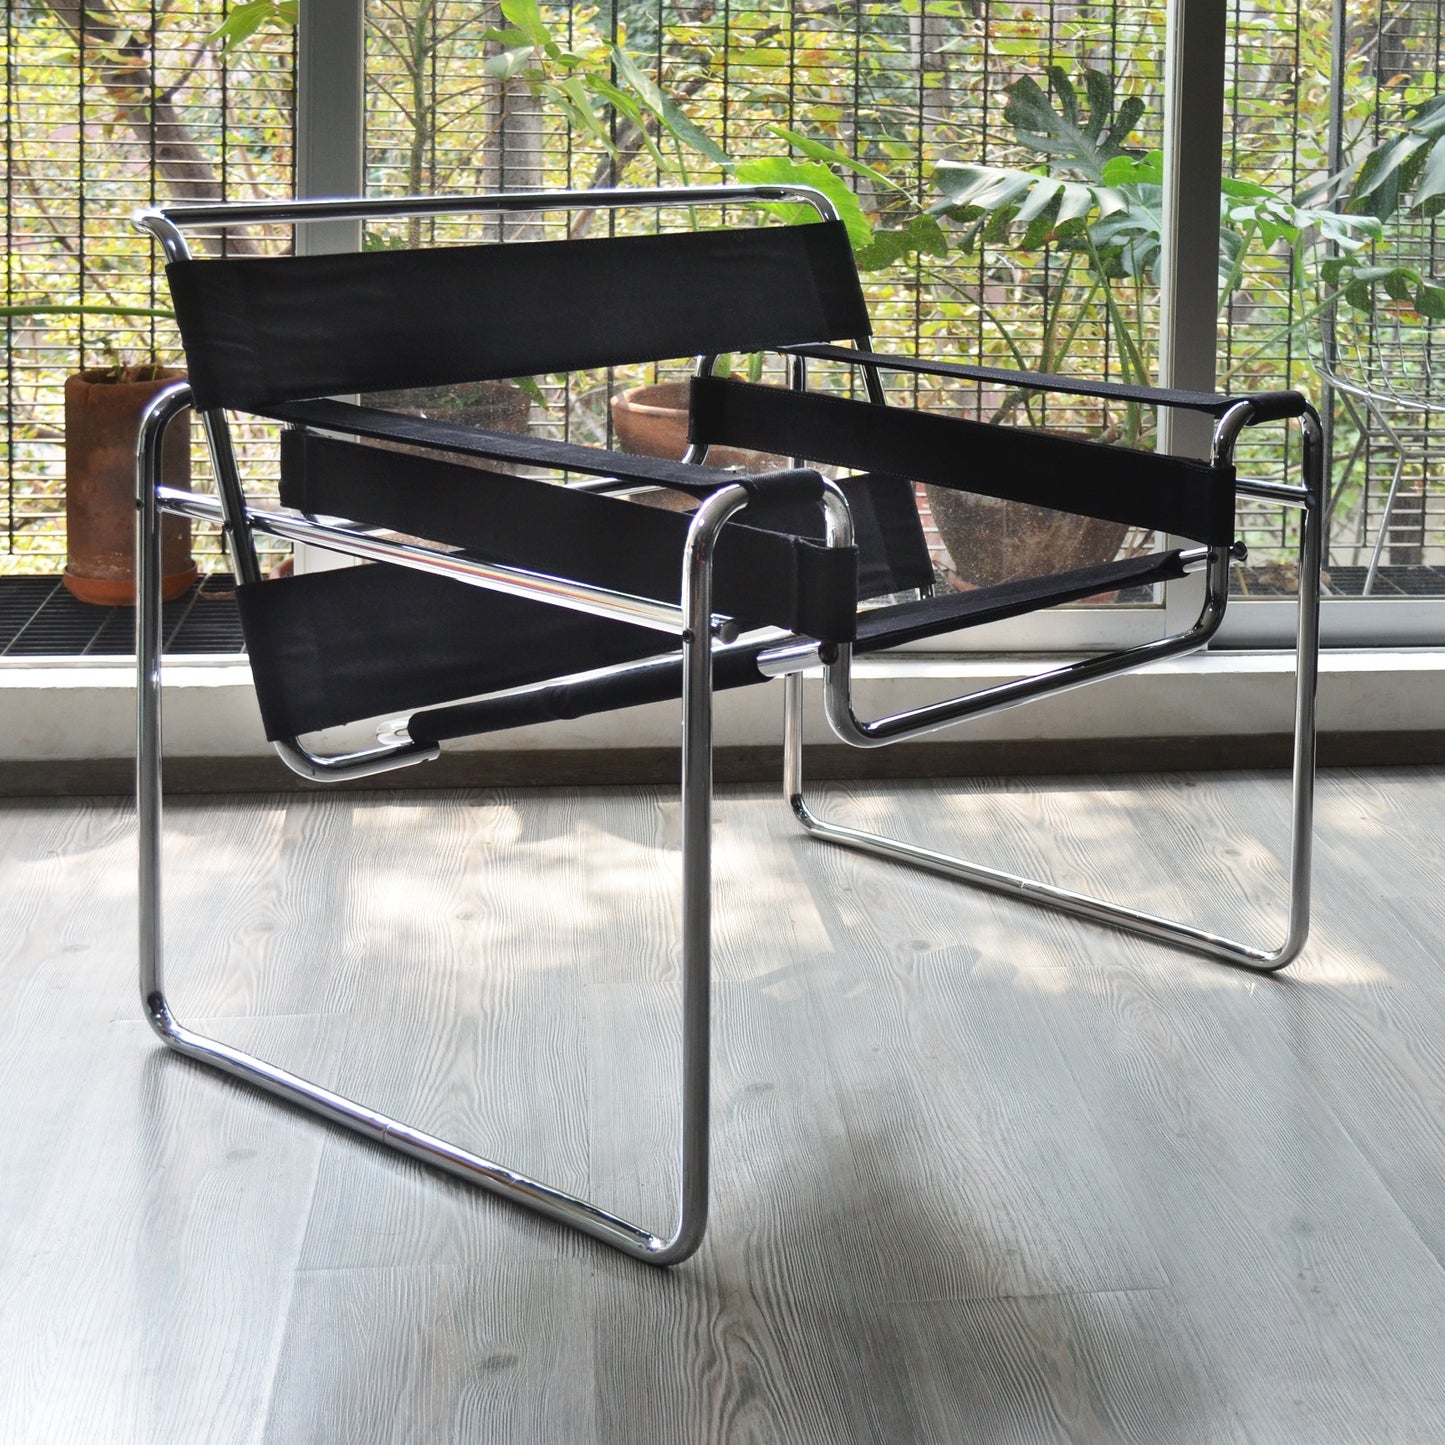 Wassily Chair- Knoll Studio